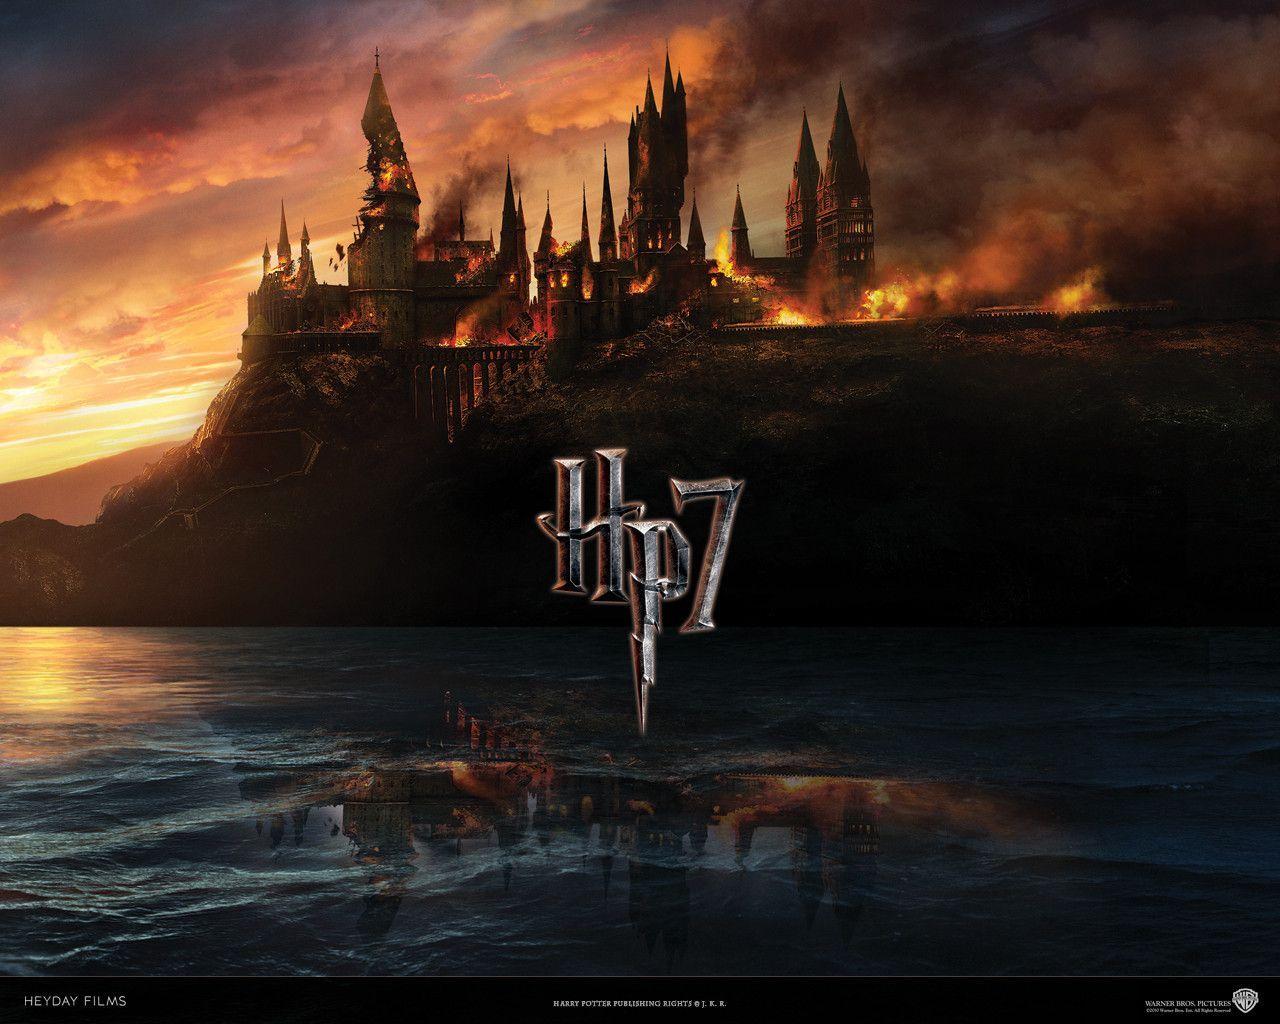 Hogwarts Potter and the Deathly Hallows Movies Wallpaper